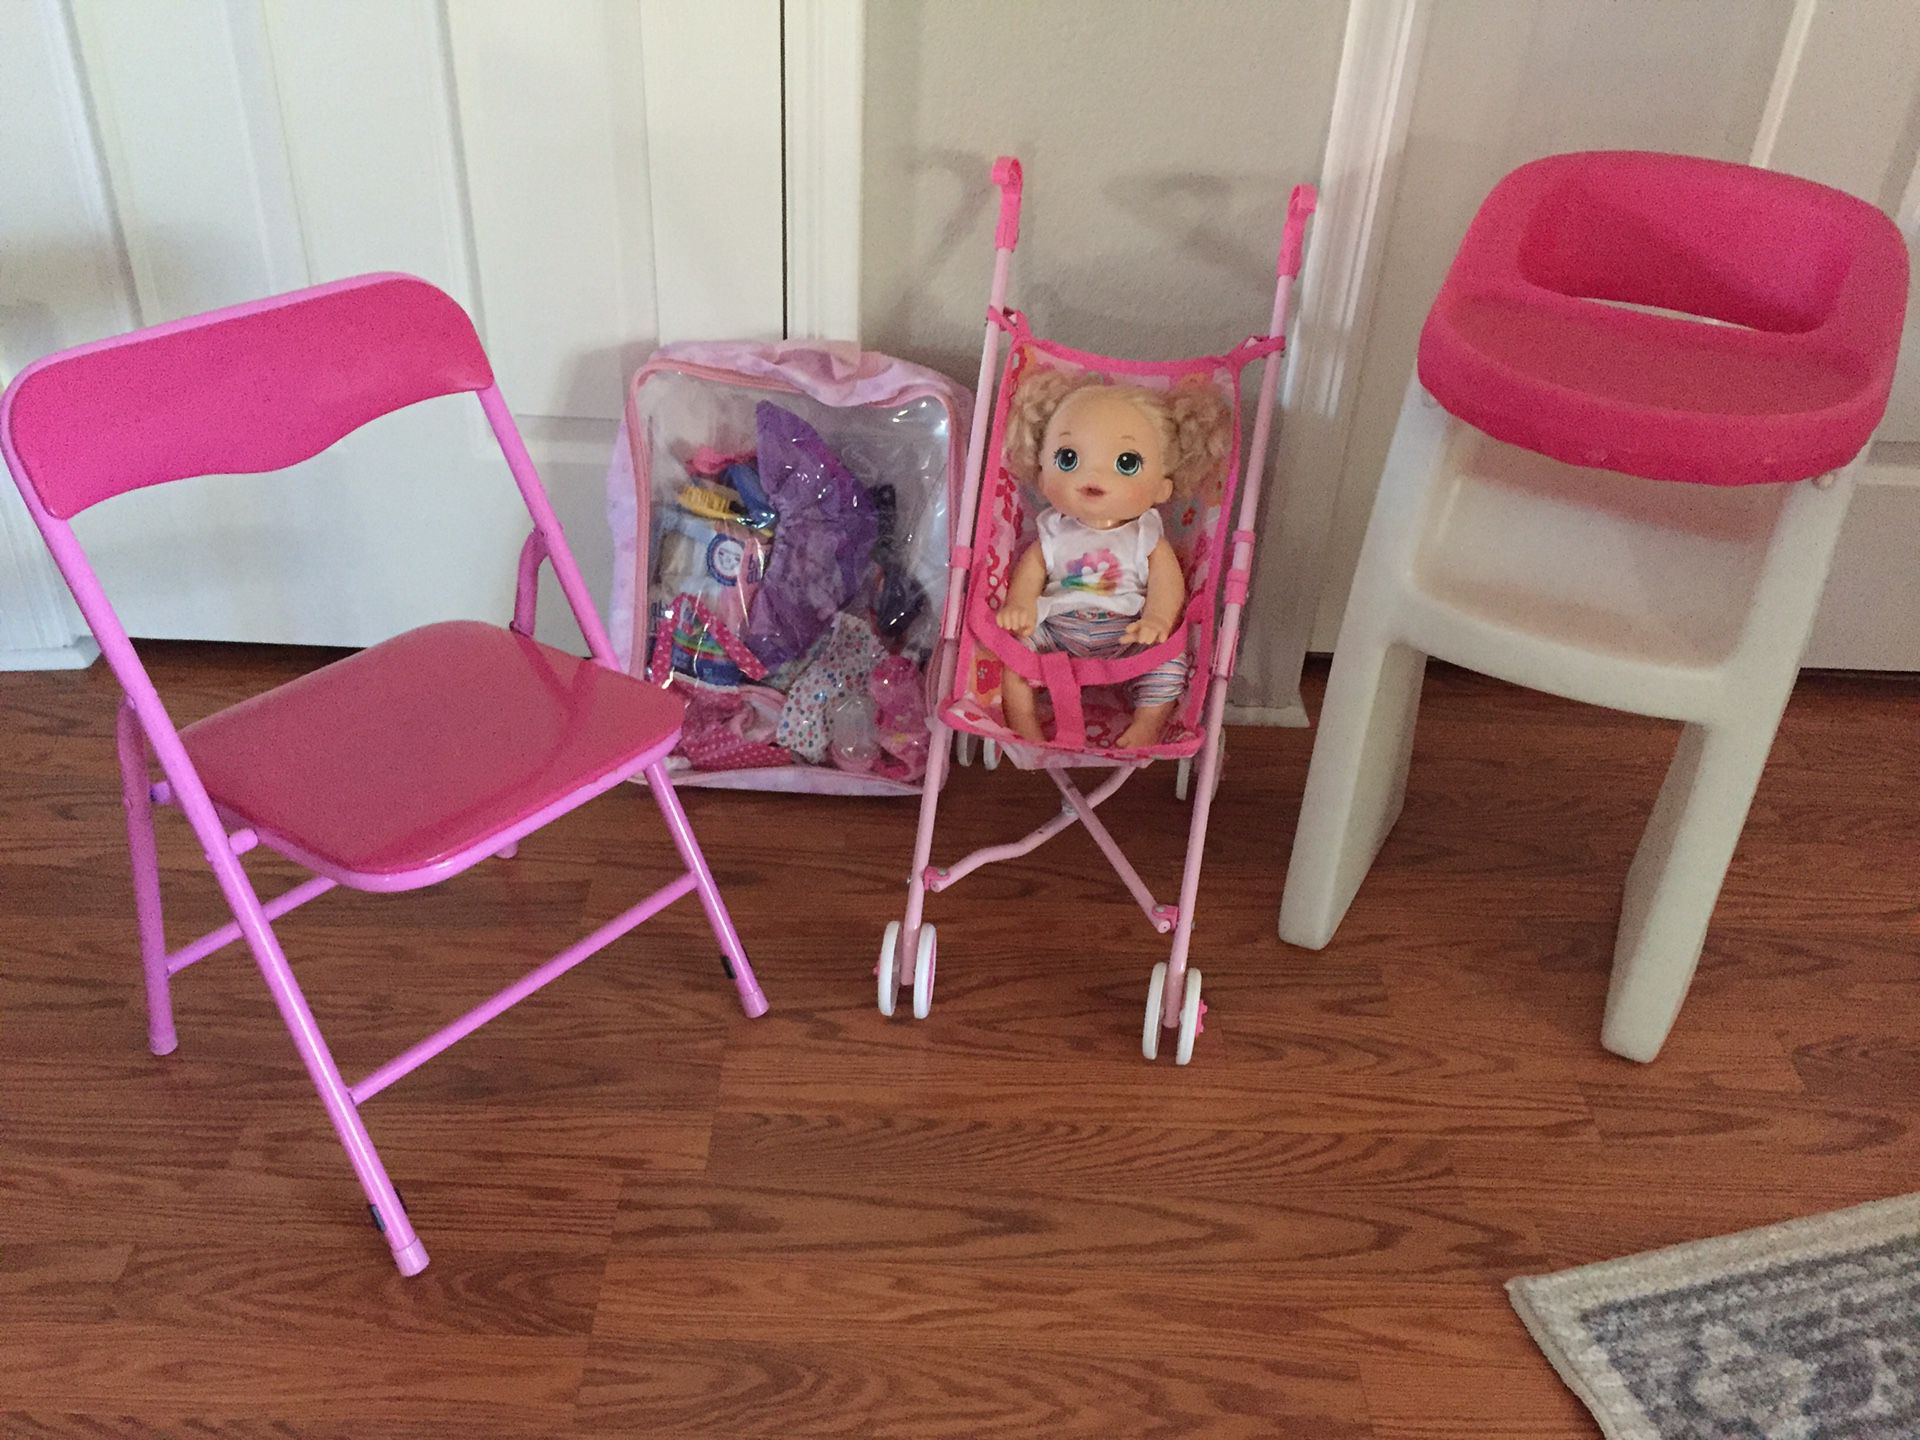 Doll Items and Girls Chair